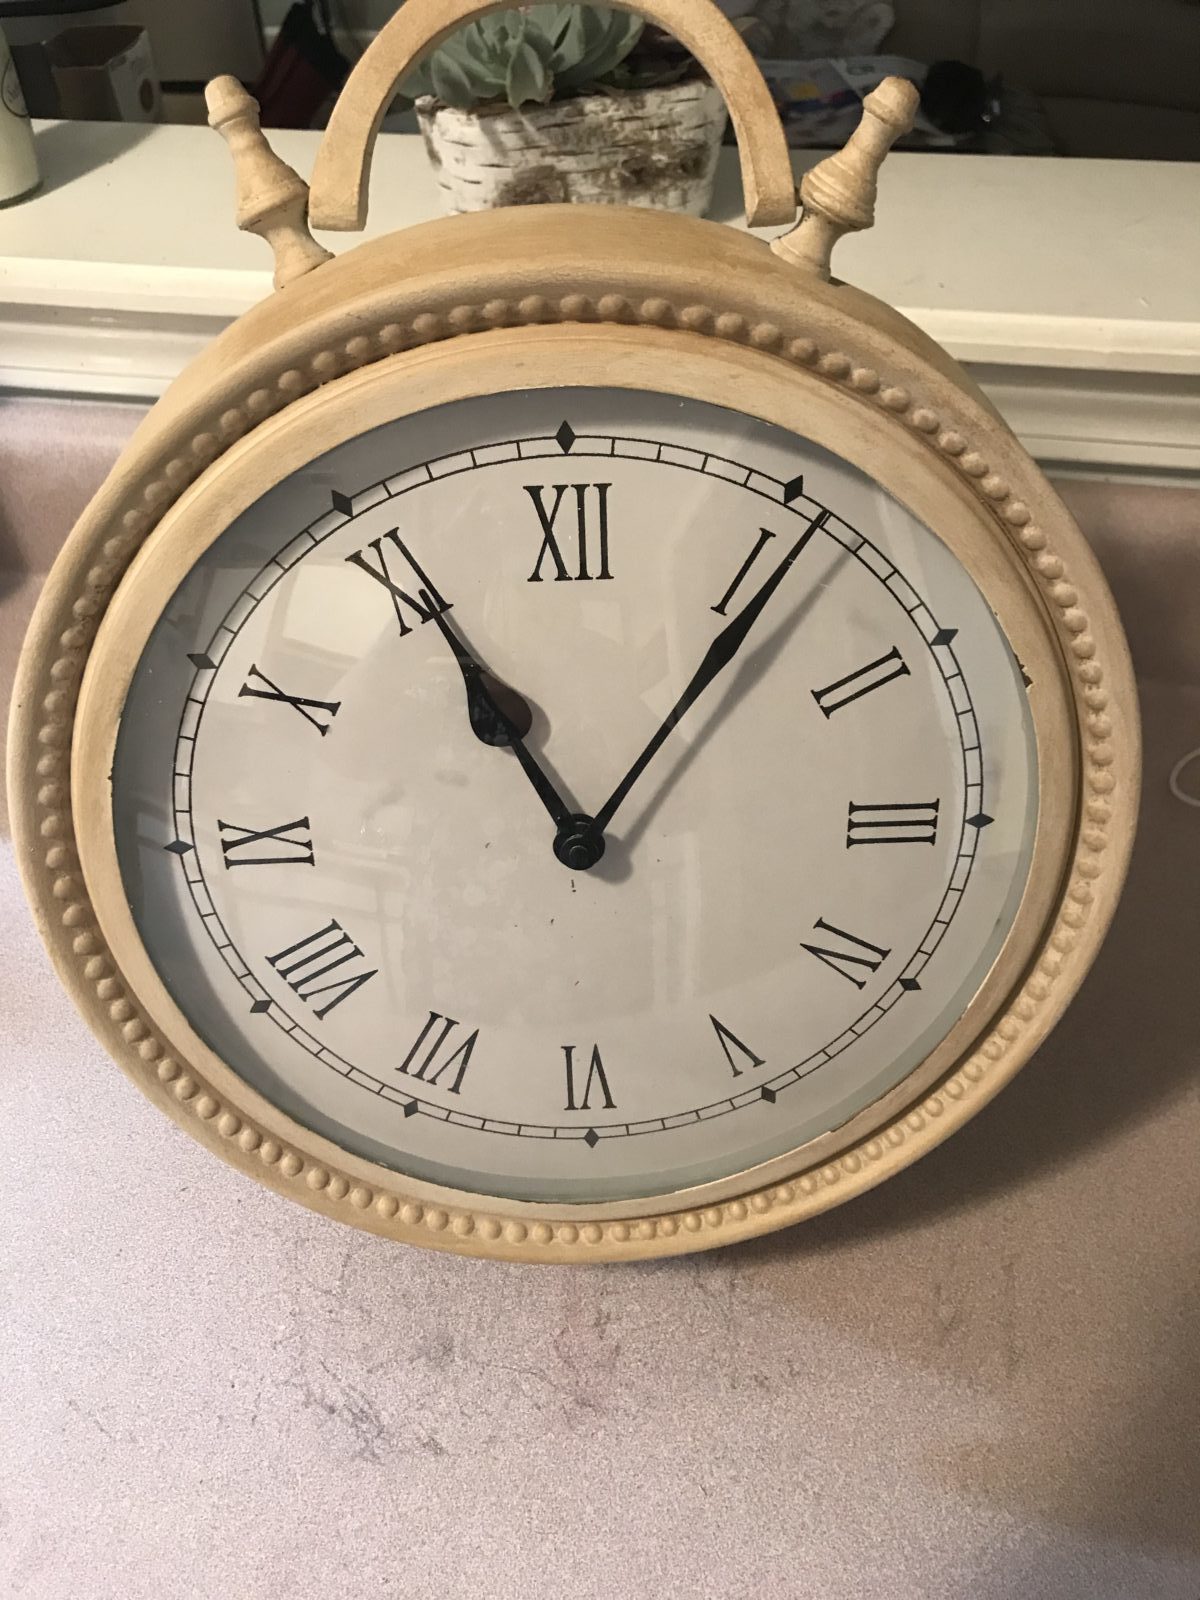 Vintage Style Clock • We updated from antique brass to this antique white to make this clock a great statement piece for any room & accent to any decor. Measures 14” high and 12” wide. Battery operated. Do you have a housewarming, anniversary or wedding coming up? Great gift!